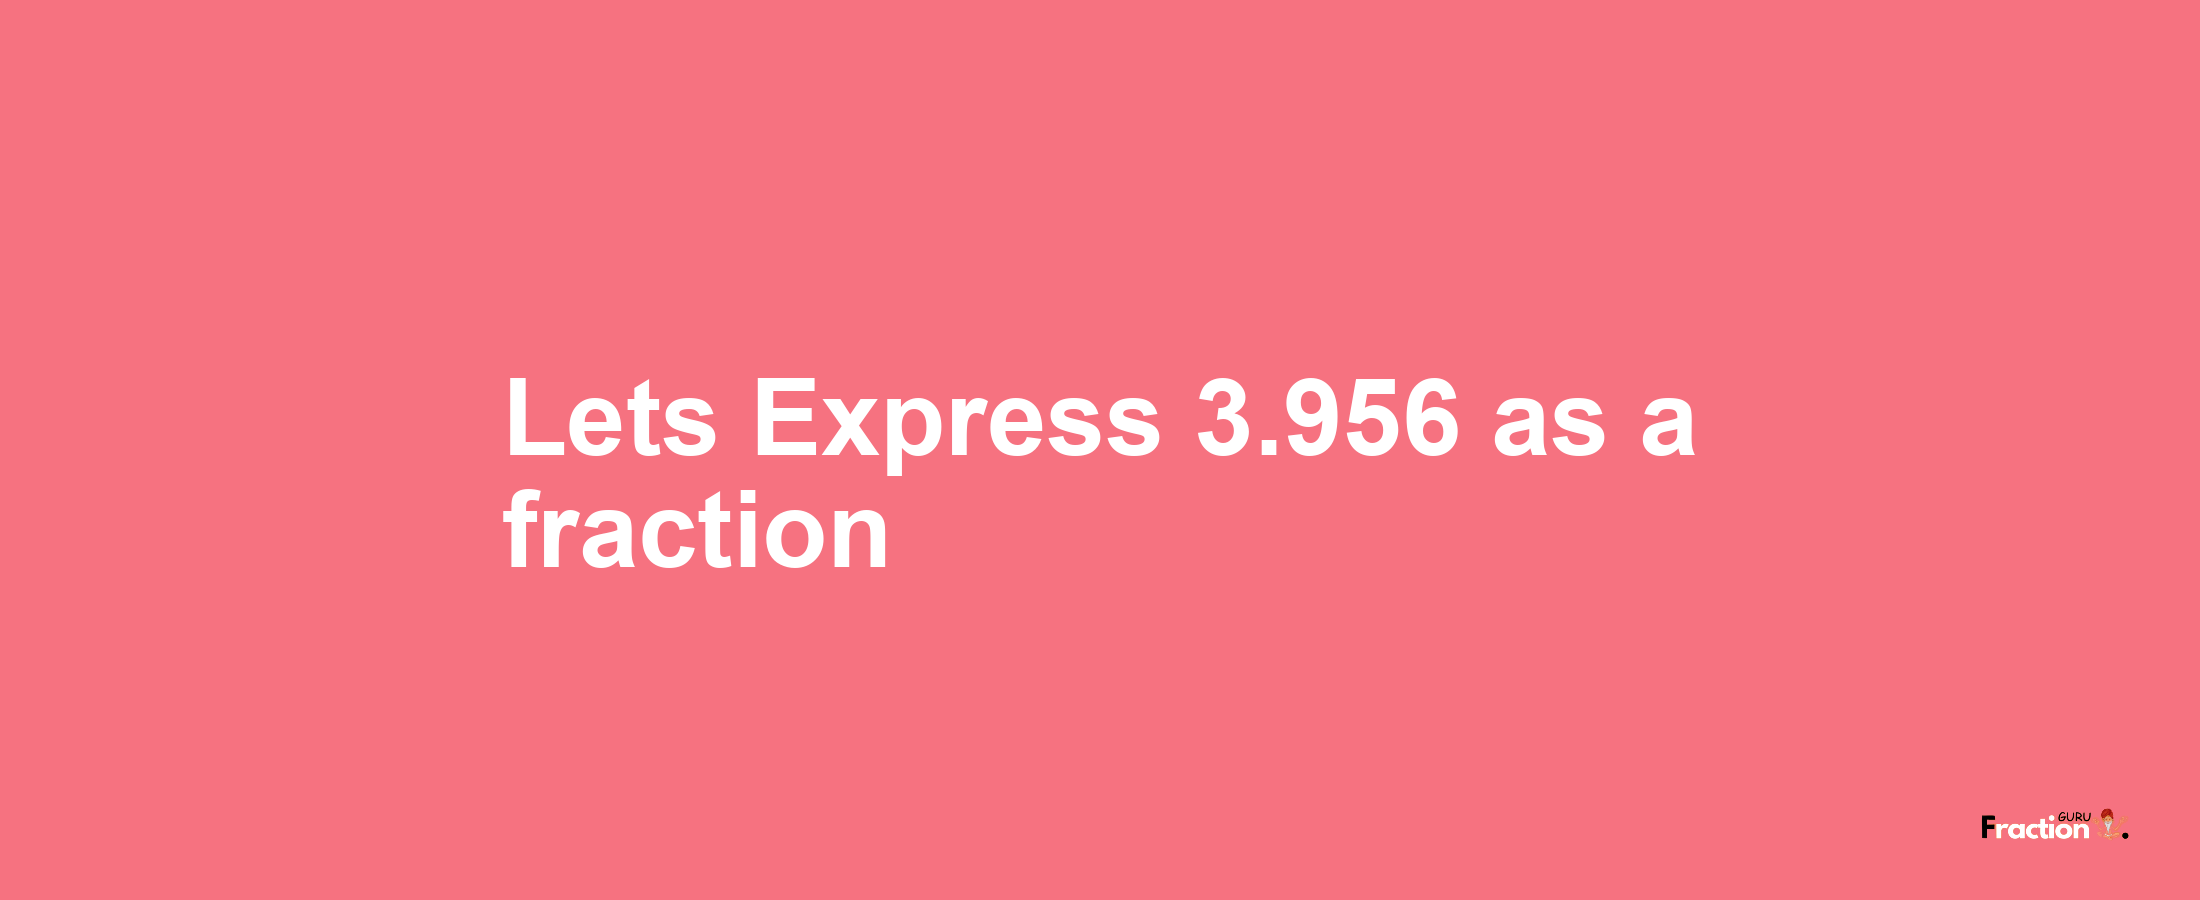 Lets Express 3.956 as afraction